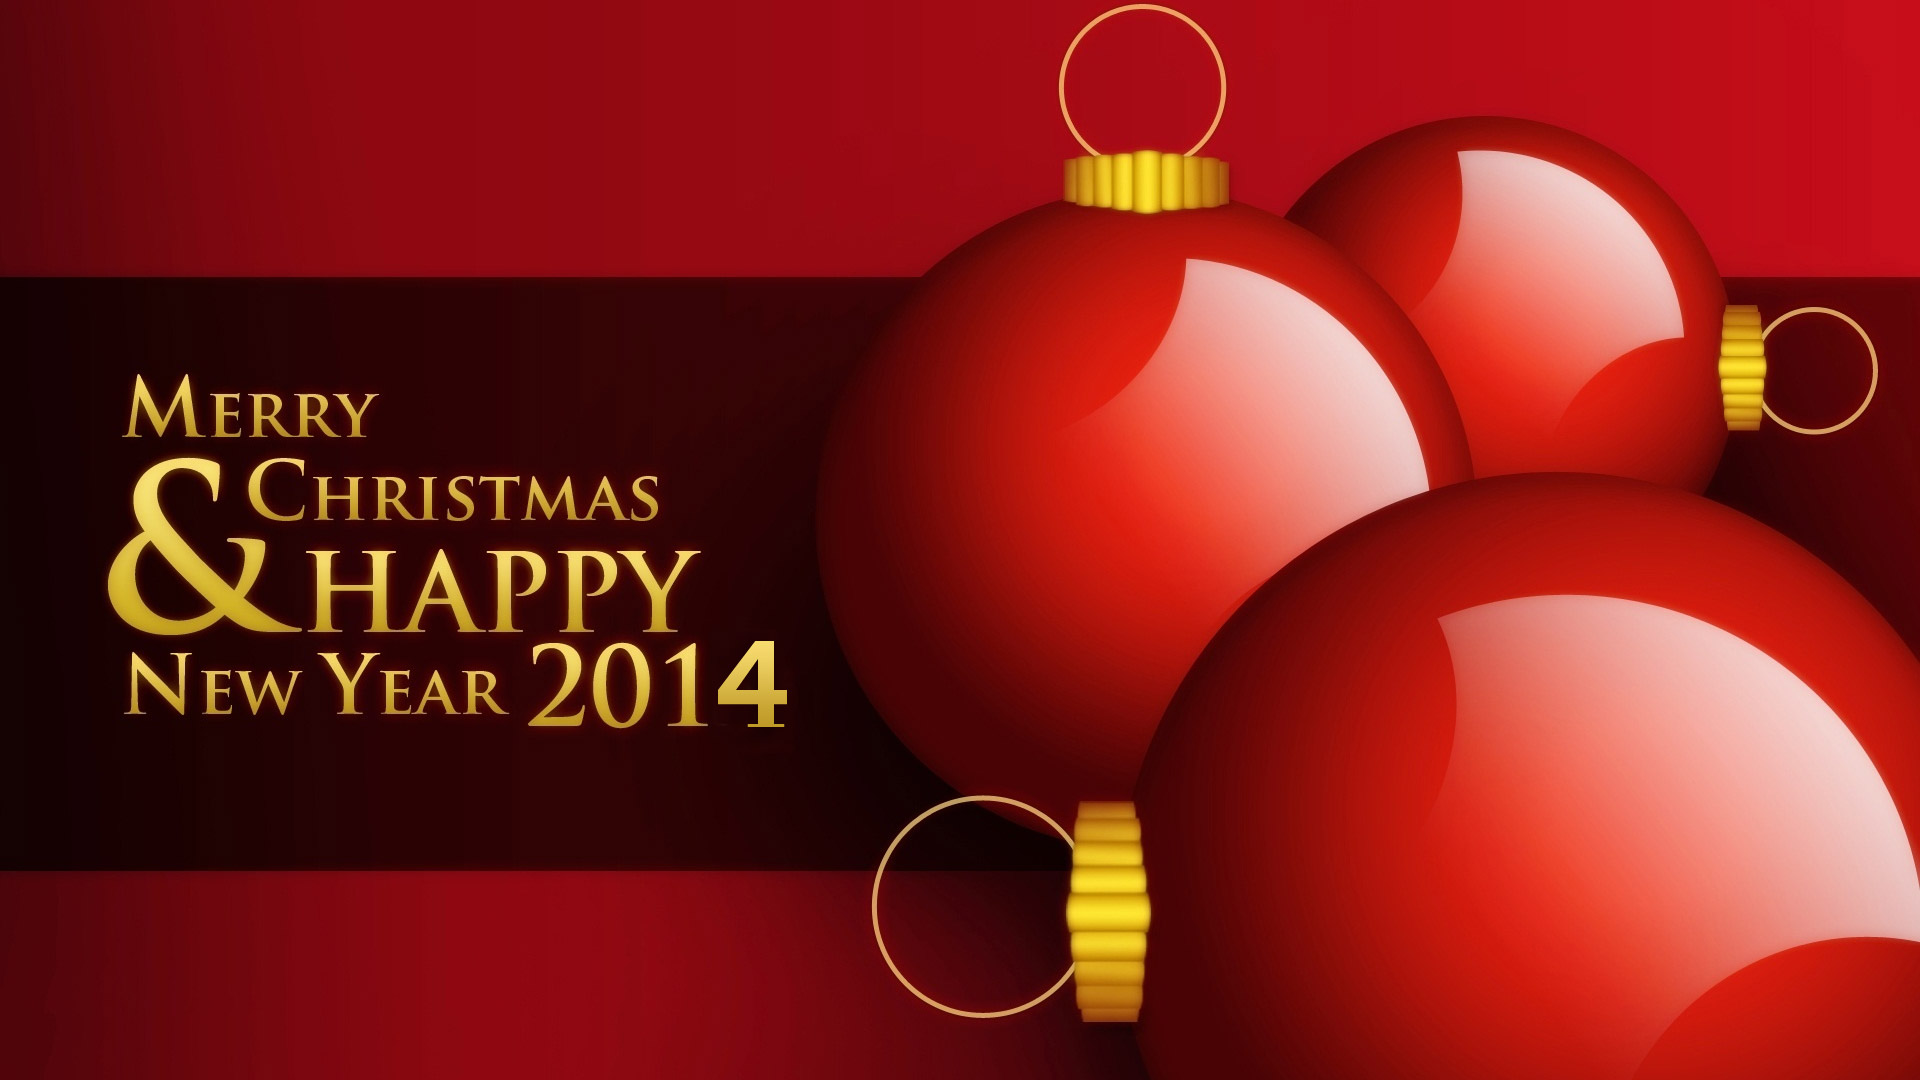  We would like to wish all our customers and Employees a Merry Christmas and a Happy New Year 2014